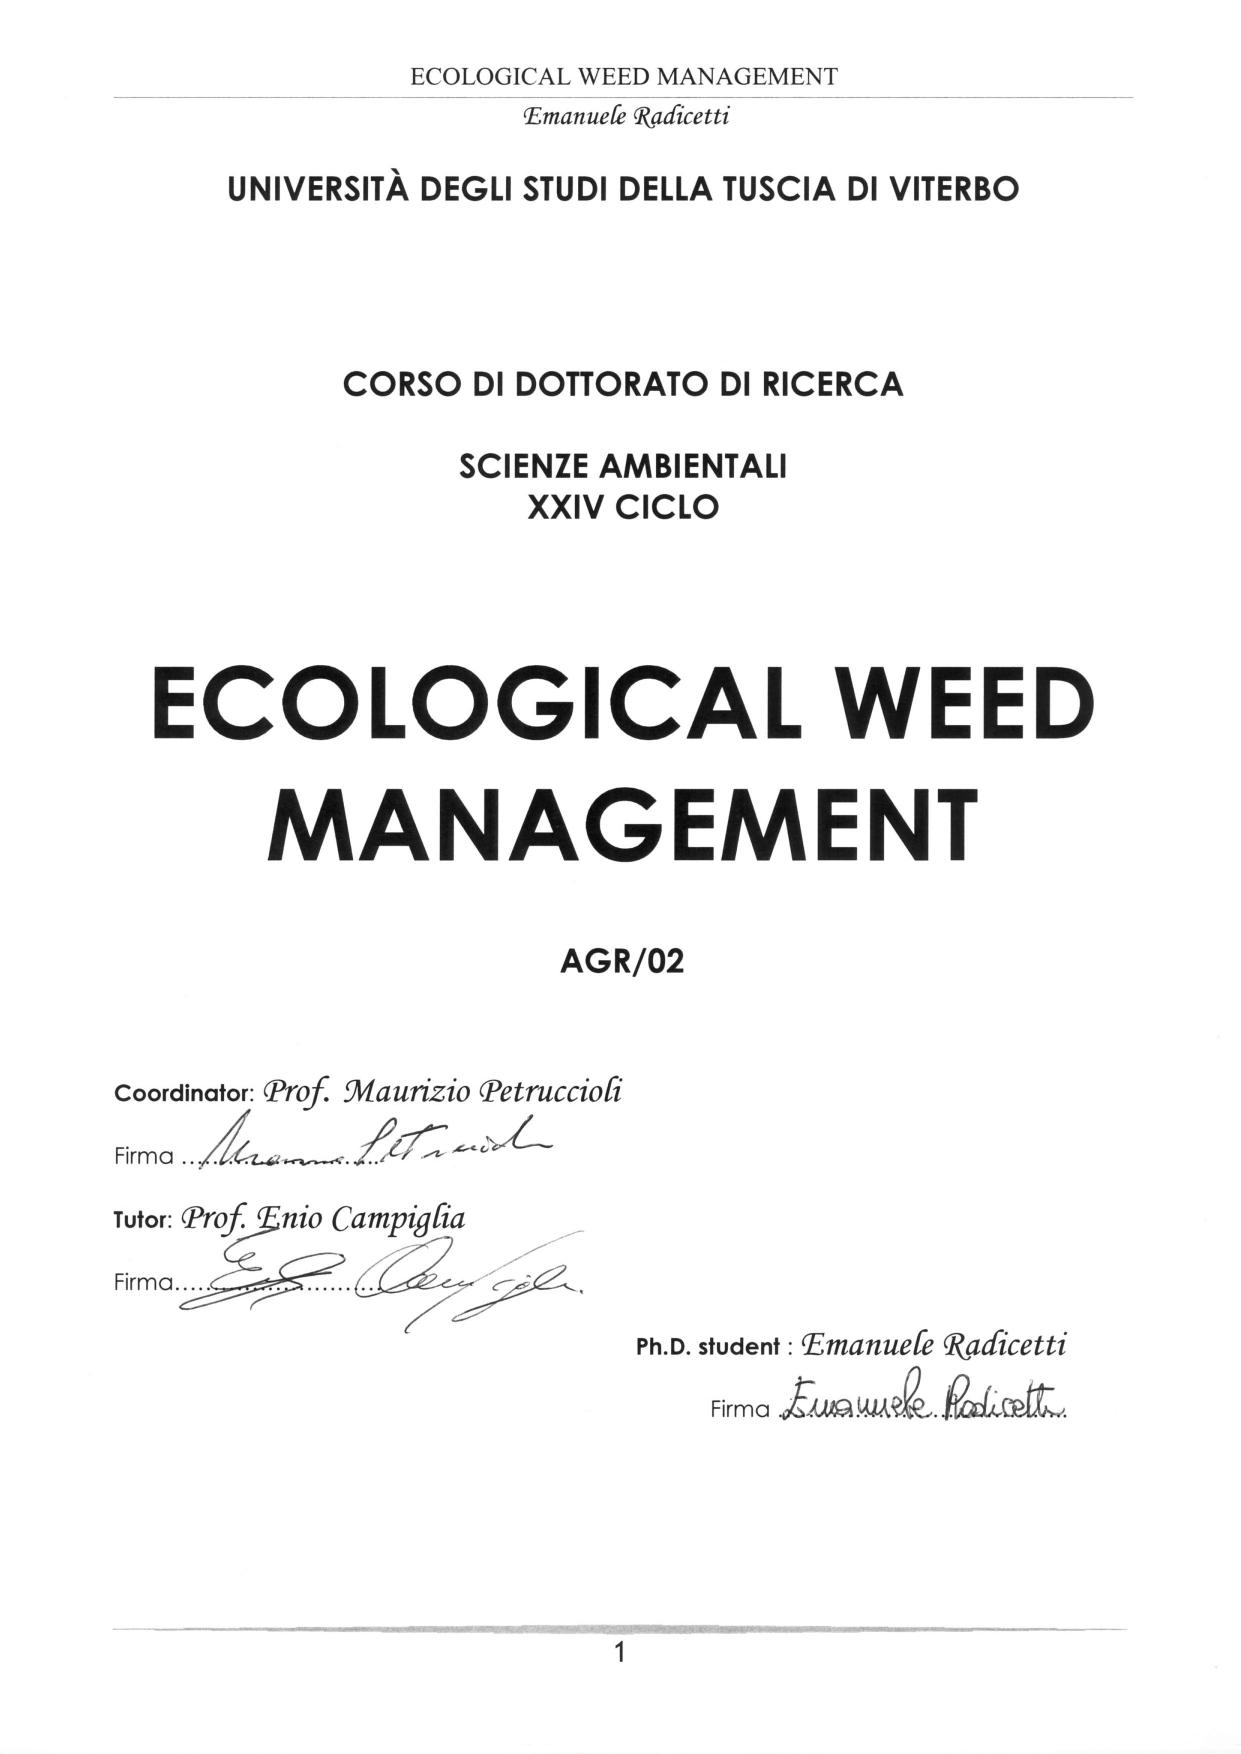 Ecological Weed Management 2012 -